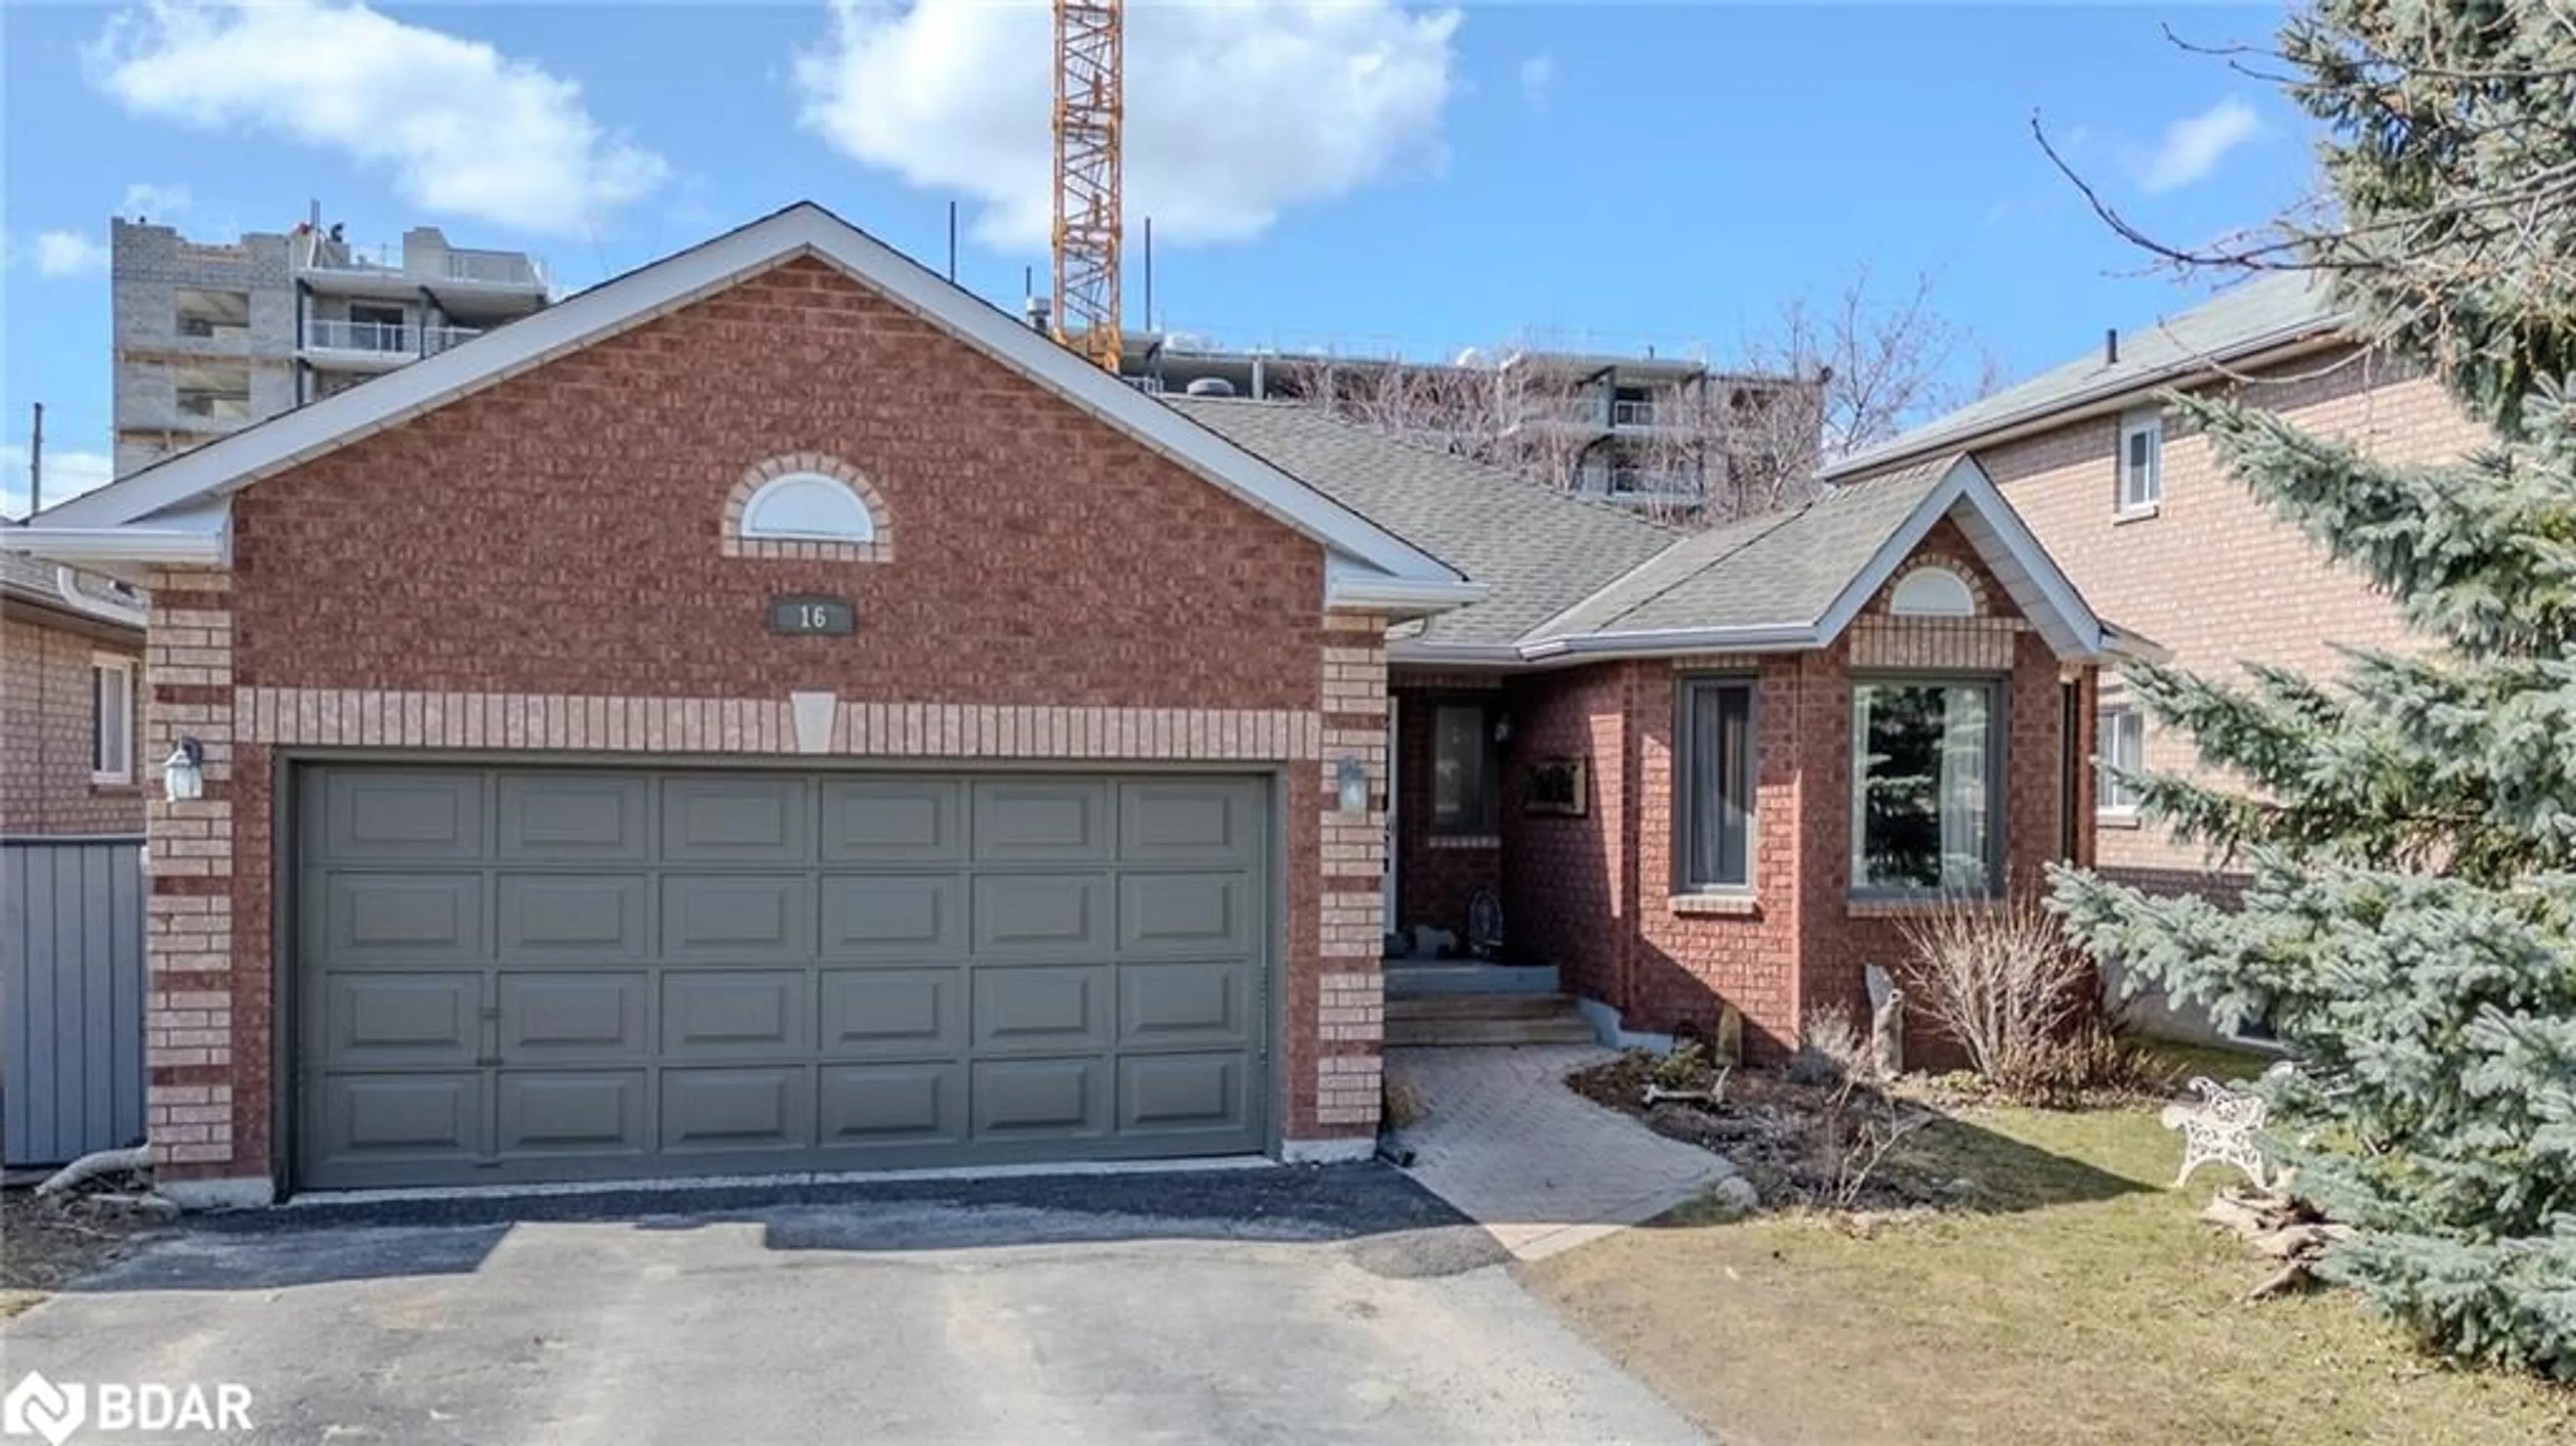 Home with brick exterior material for 16 Warner Rd, Barrie Ontario L4N 7M4